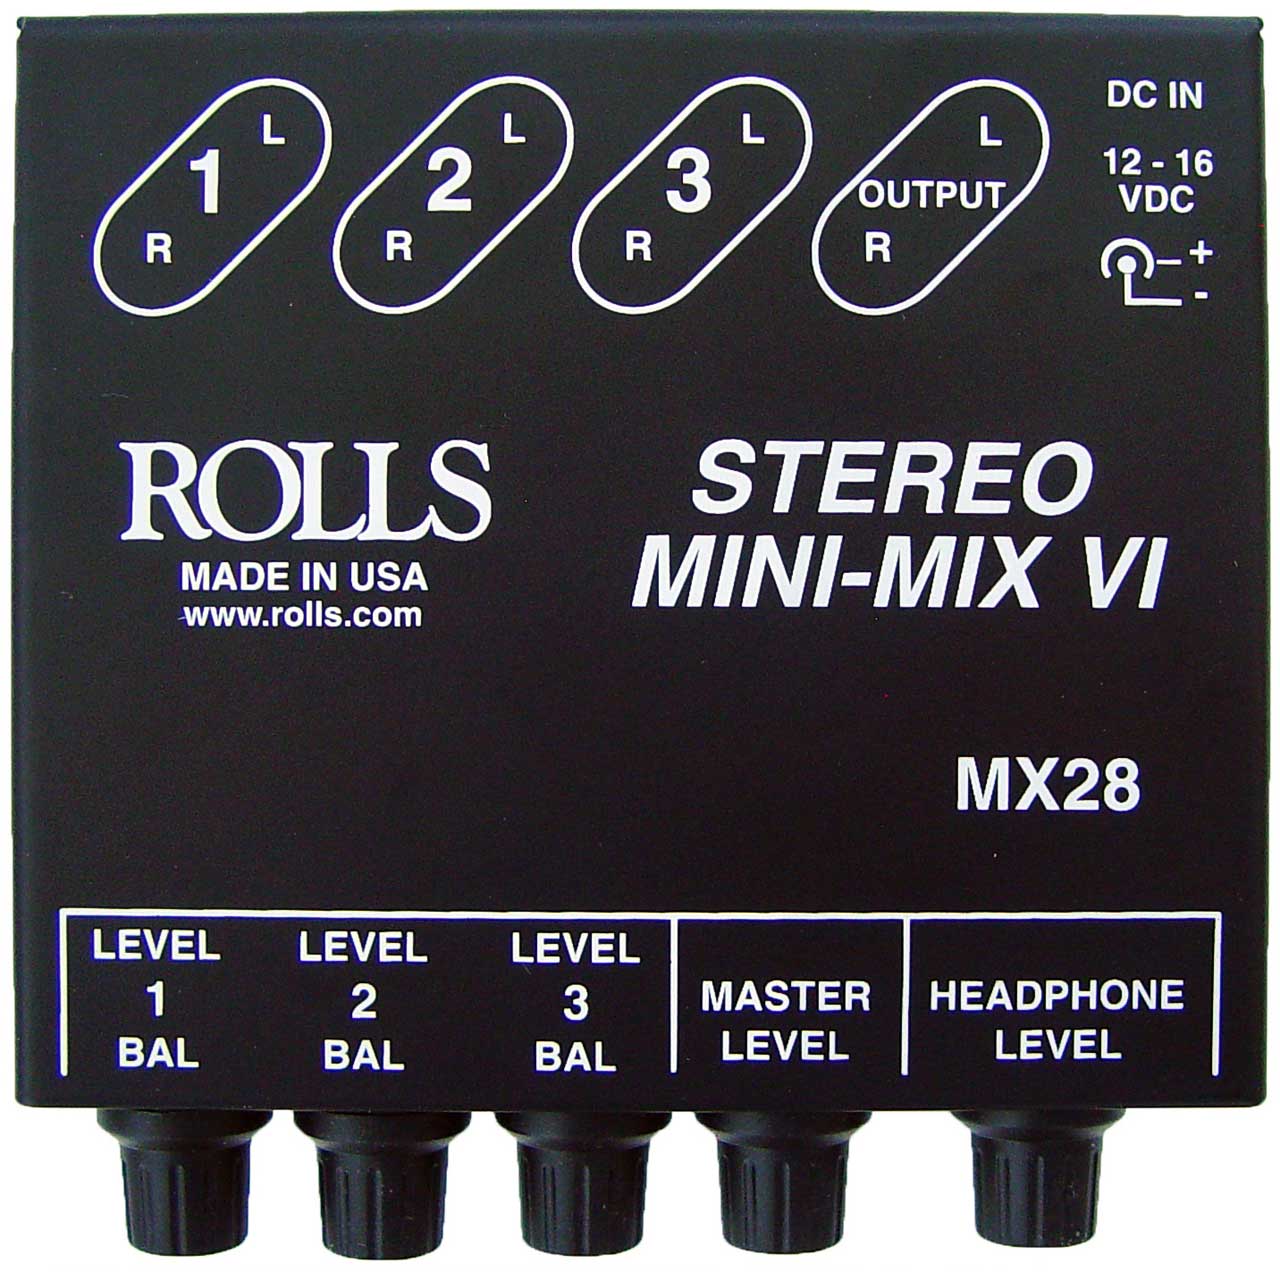 Line mix. Compact stereo Mini Mixer - Rolls mx42. Rolls mx442. Car stereo line Mixer. How to underlay a Mini Mixer to the main one.